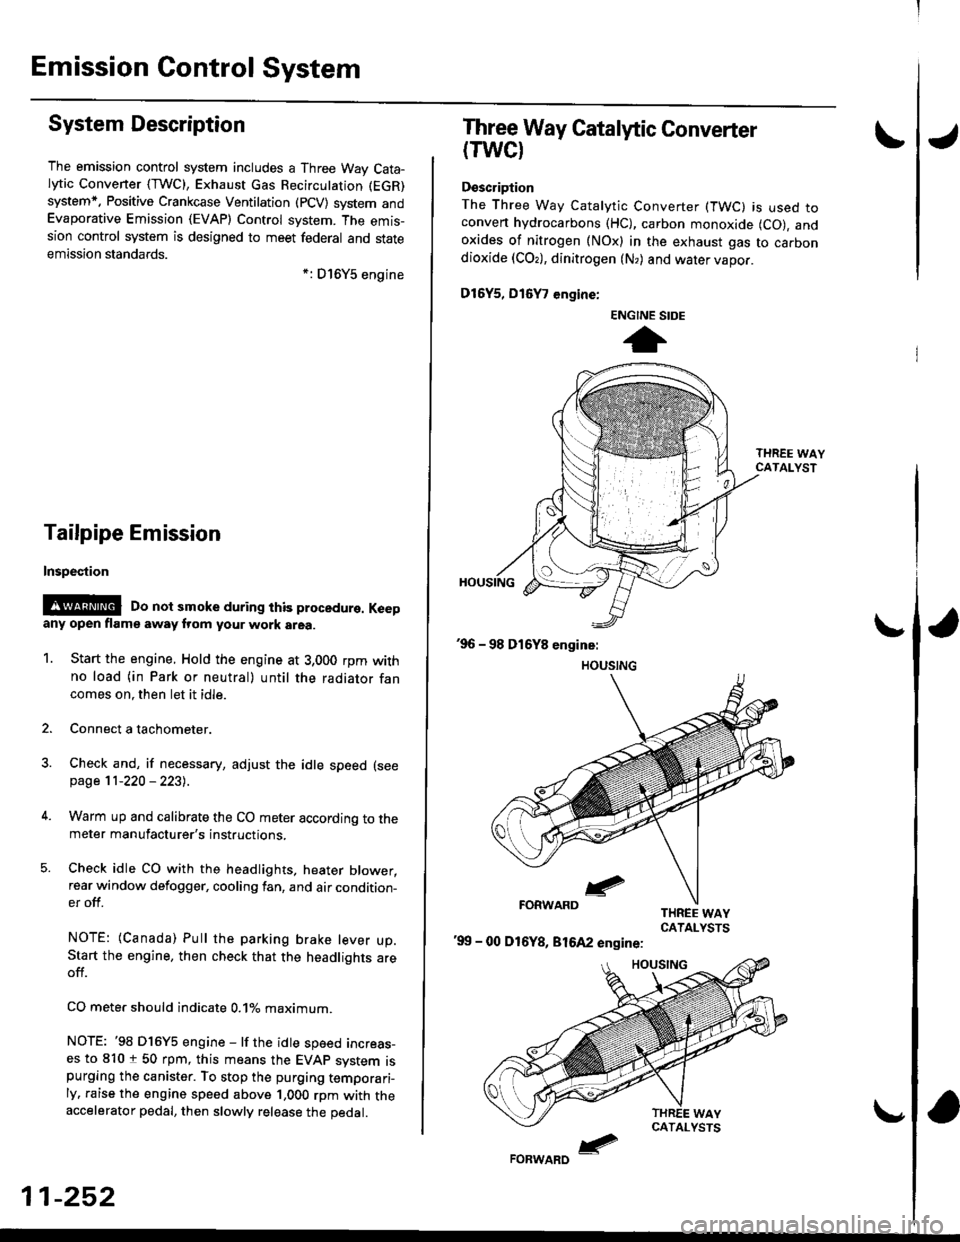 HONDA CIVIC 1996 6.G User Guide Emission Gontrol System
System Description
The emission control system includes a Three Way Cata-lytic Convener (TWC), Exhaust Gas Recirculation (EGR)
system,. Positive Crankcase Ventilation (pCV) sys